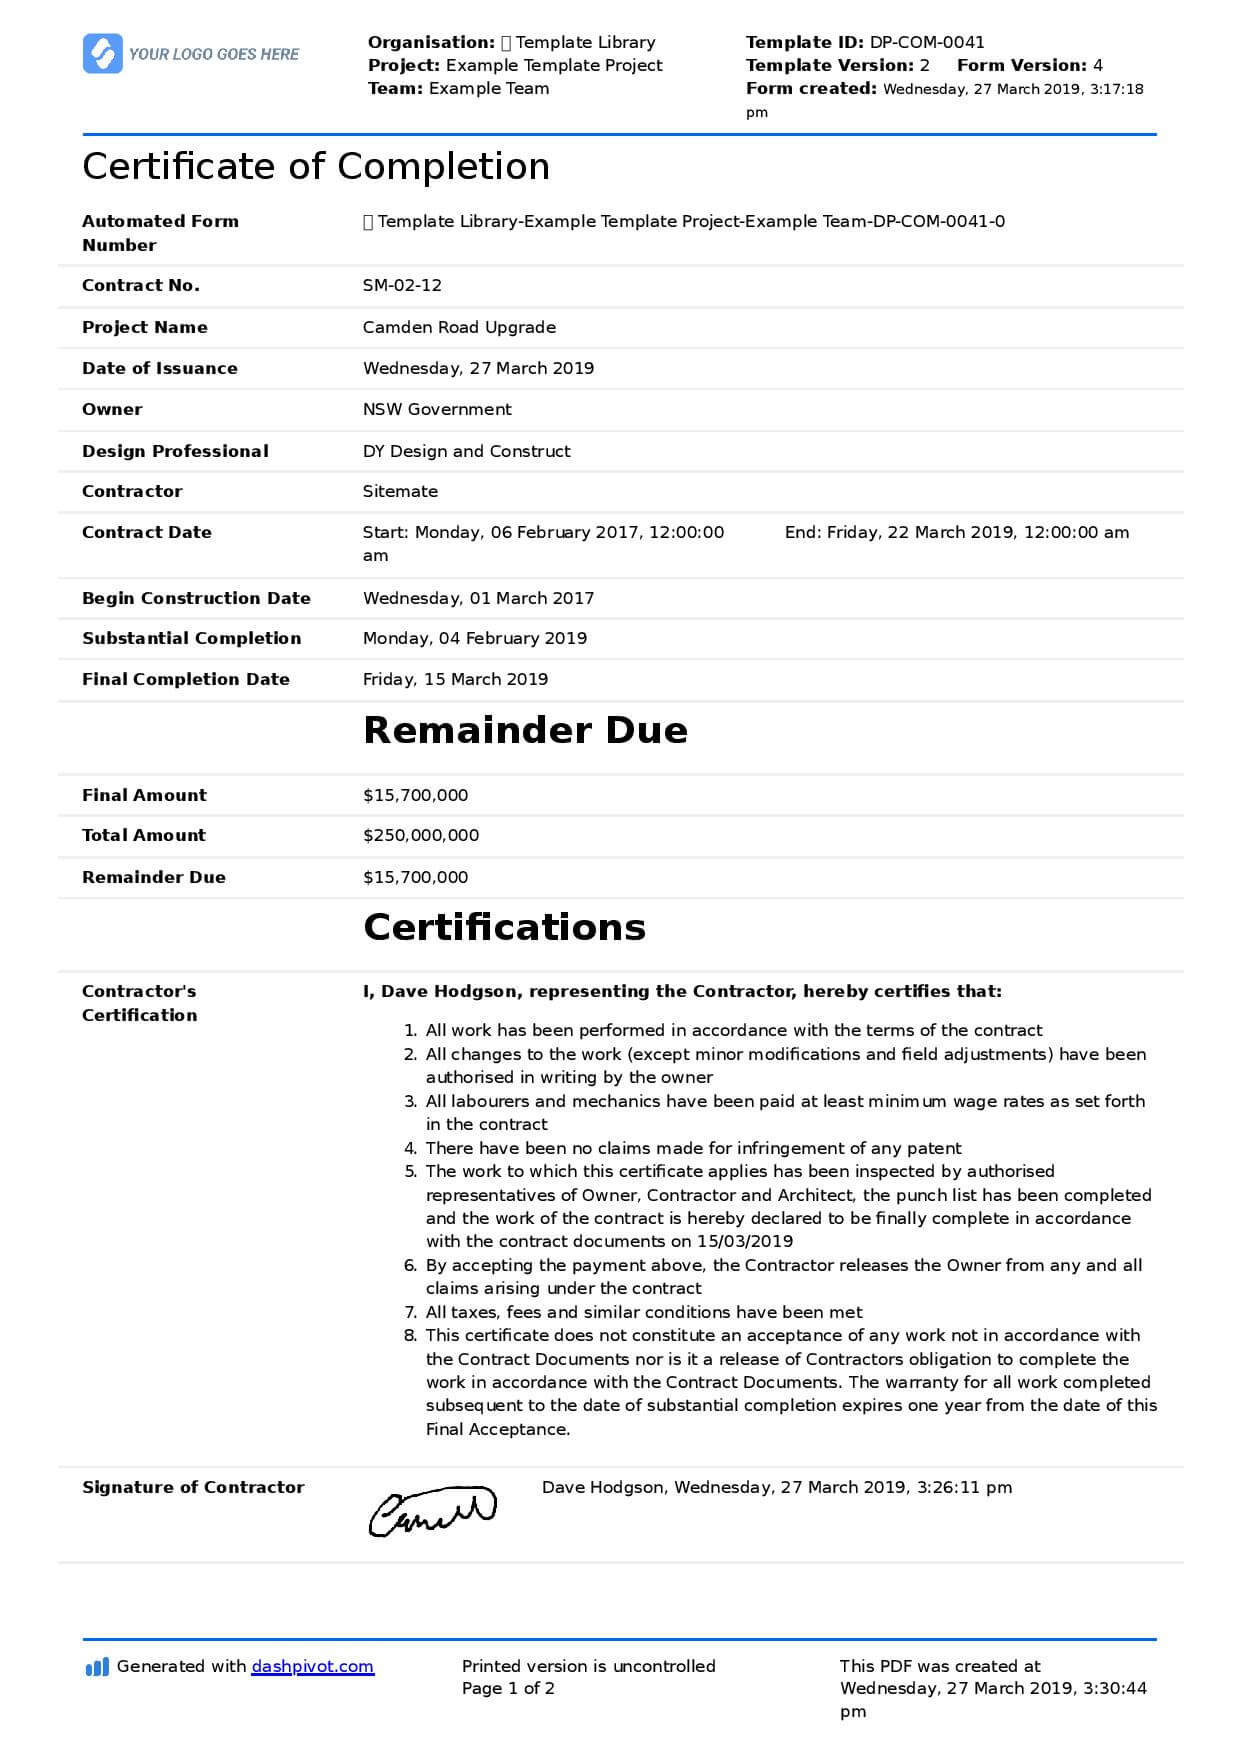 Construction Certificate Of Completion Template Intended For Fascinating Construction Certificate Of Completion Template